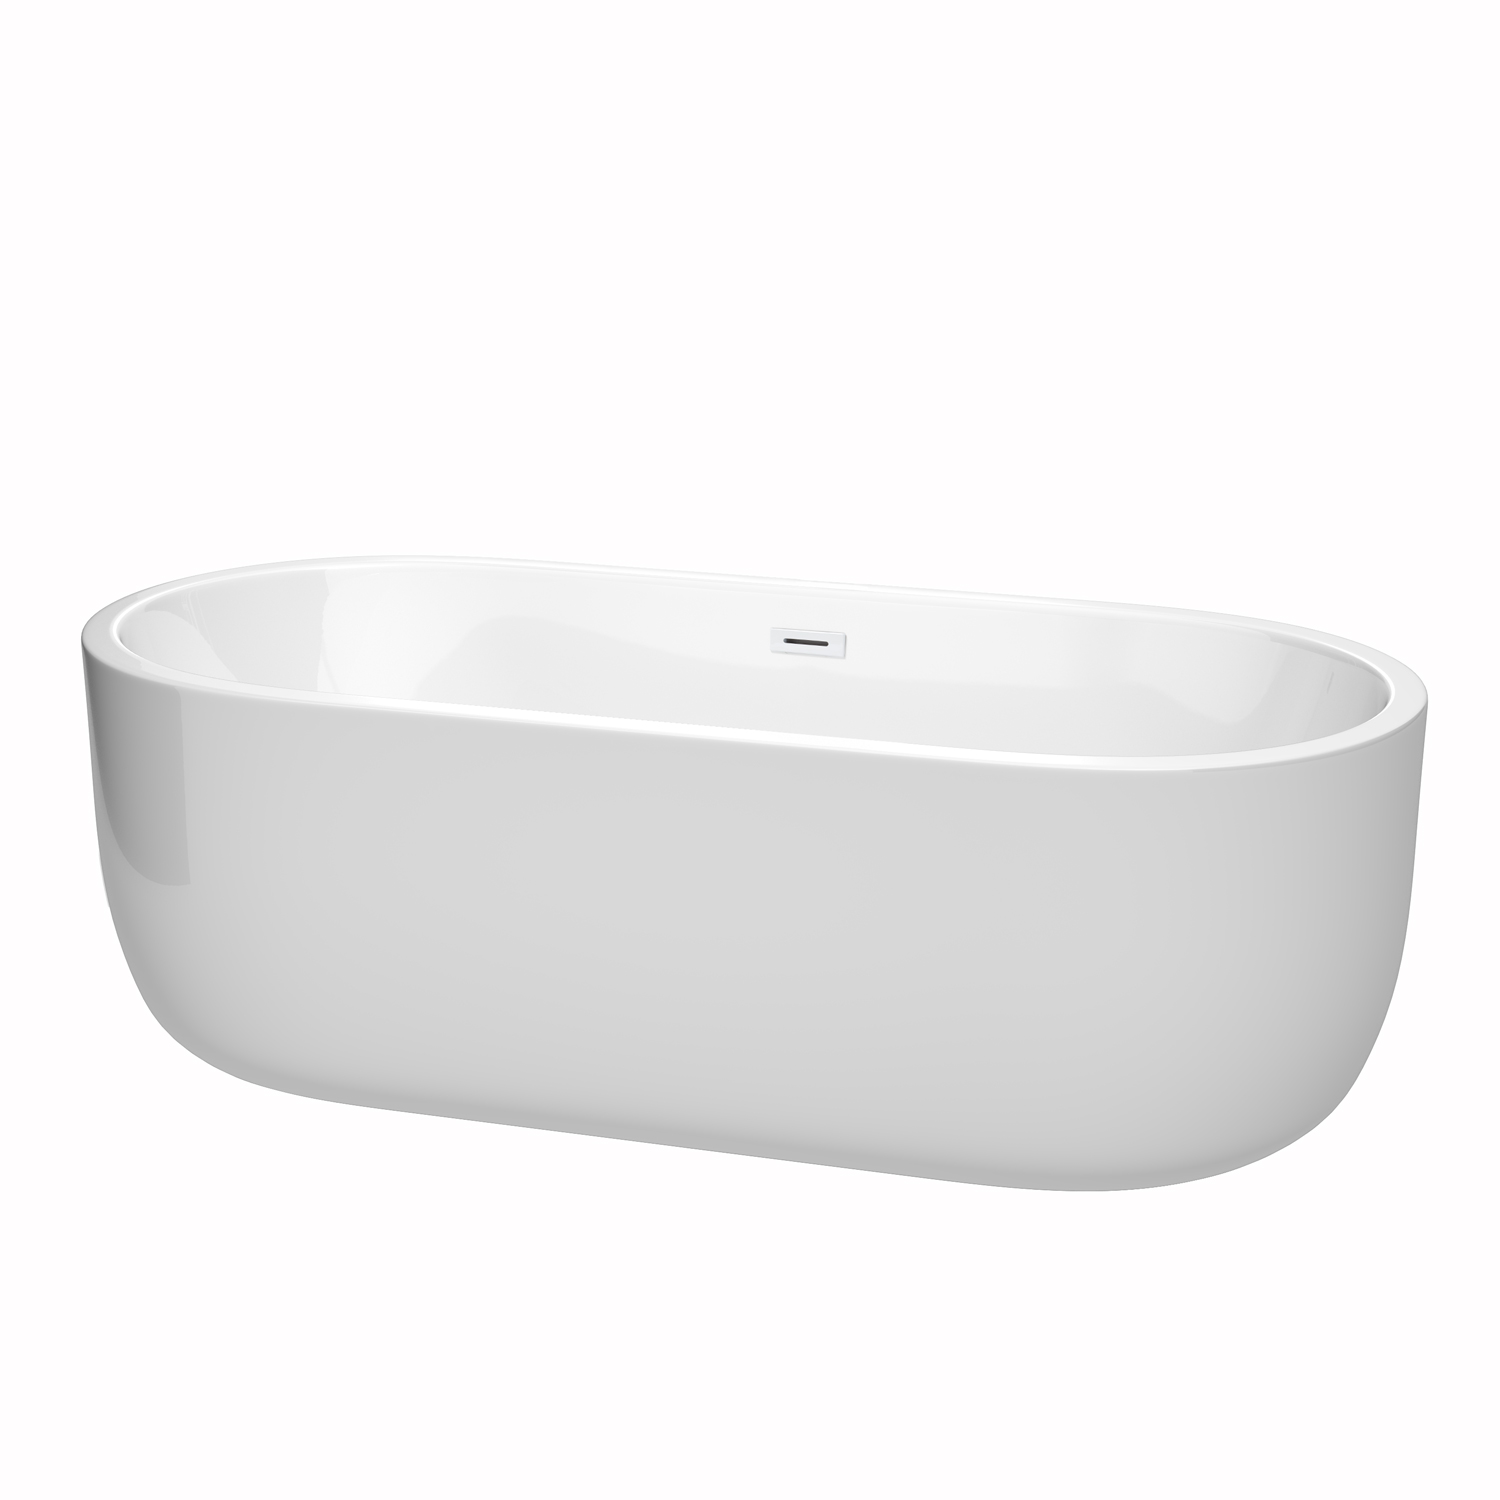 71" Freestanding Bathtub in White Finish with Shiny White Drain and Overflow Trim